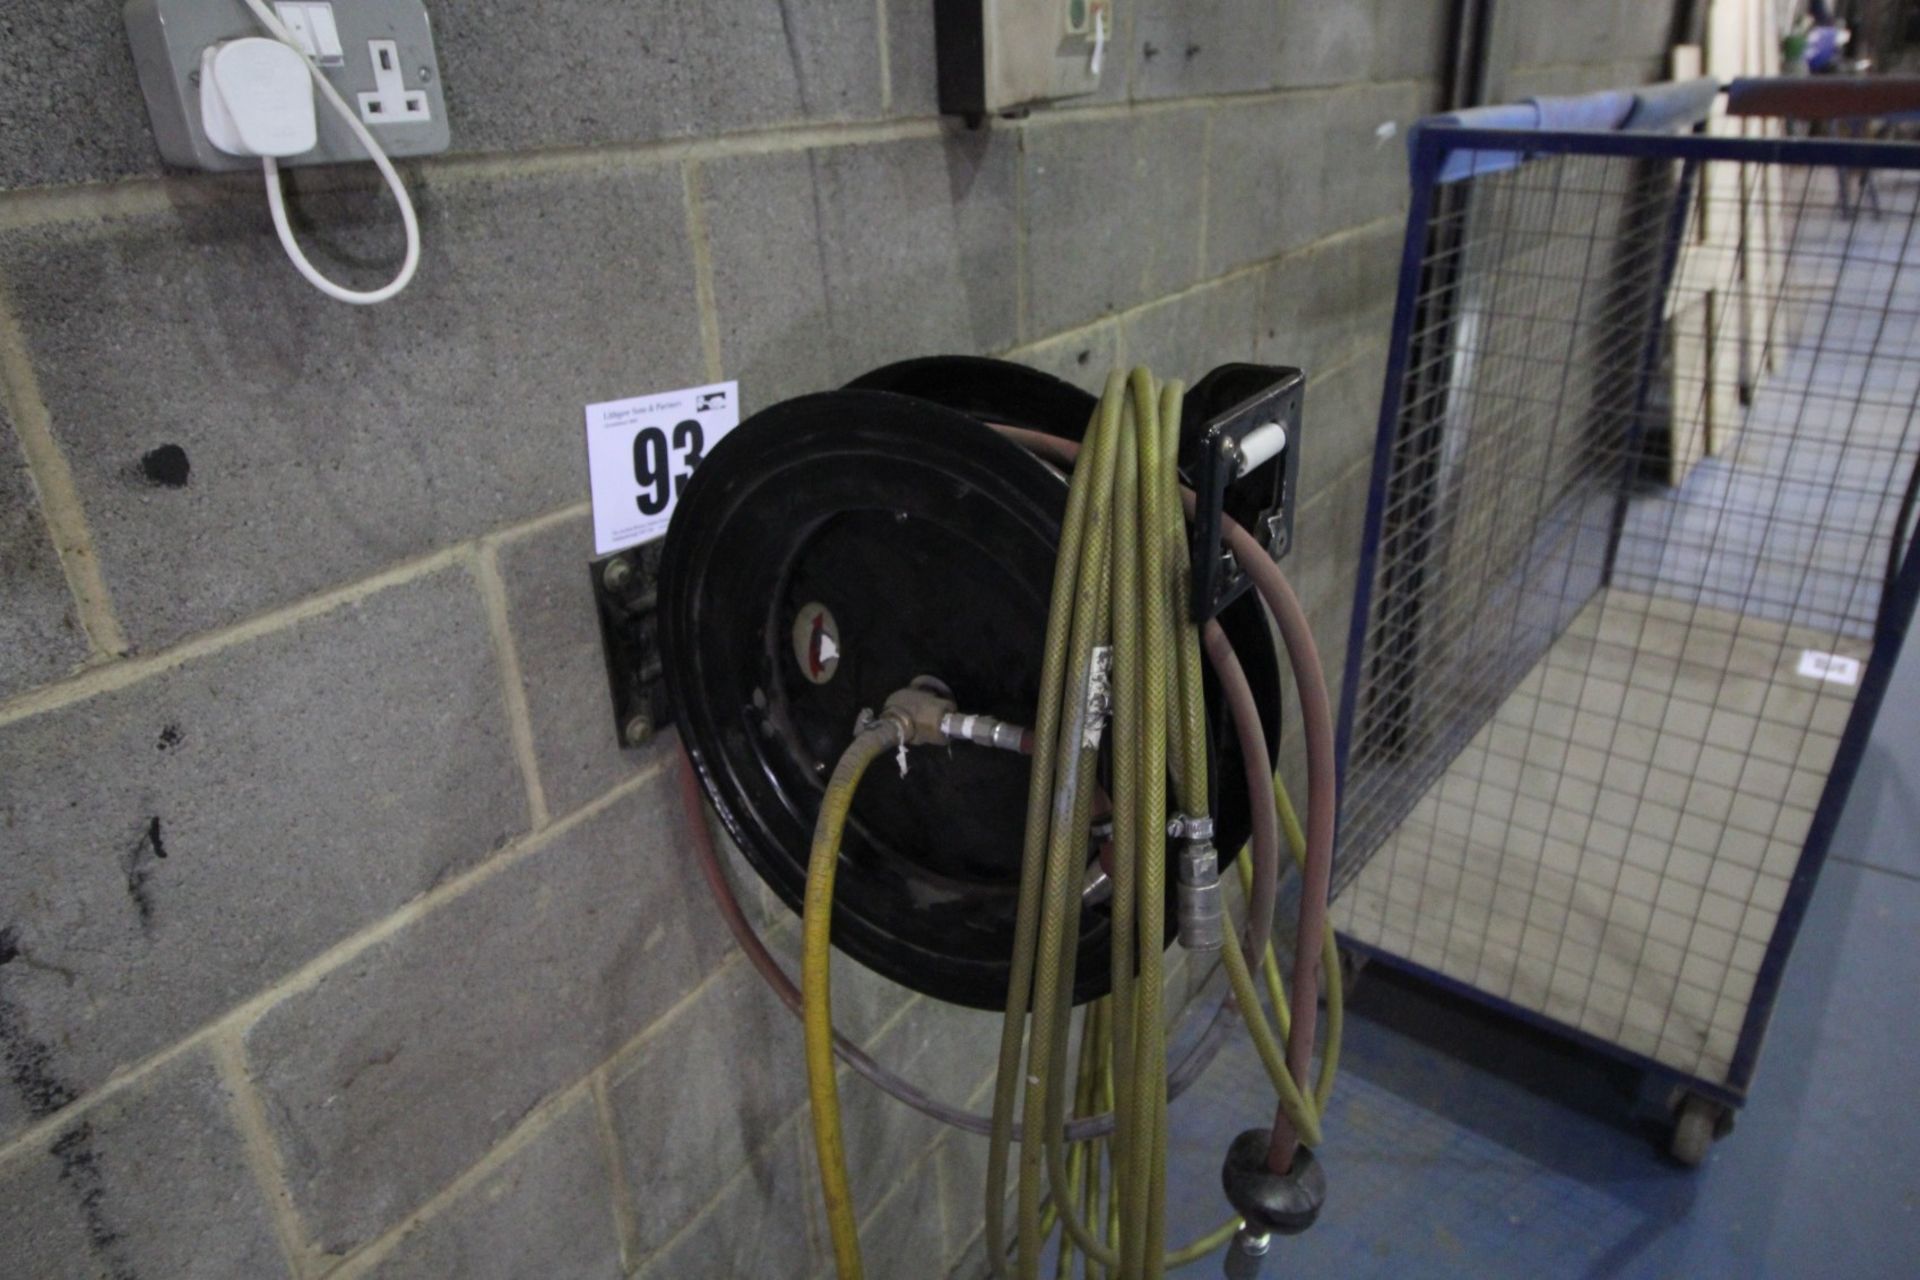 WALL MOUNTED, BLACK AIR LINE SPOOL, AND CONTENTS OF AIR LINE